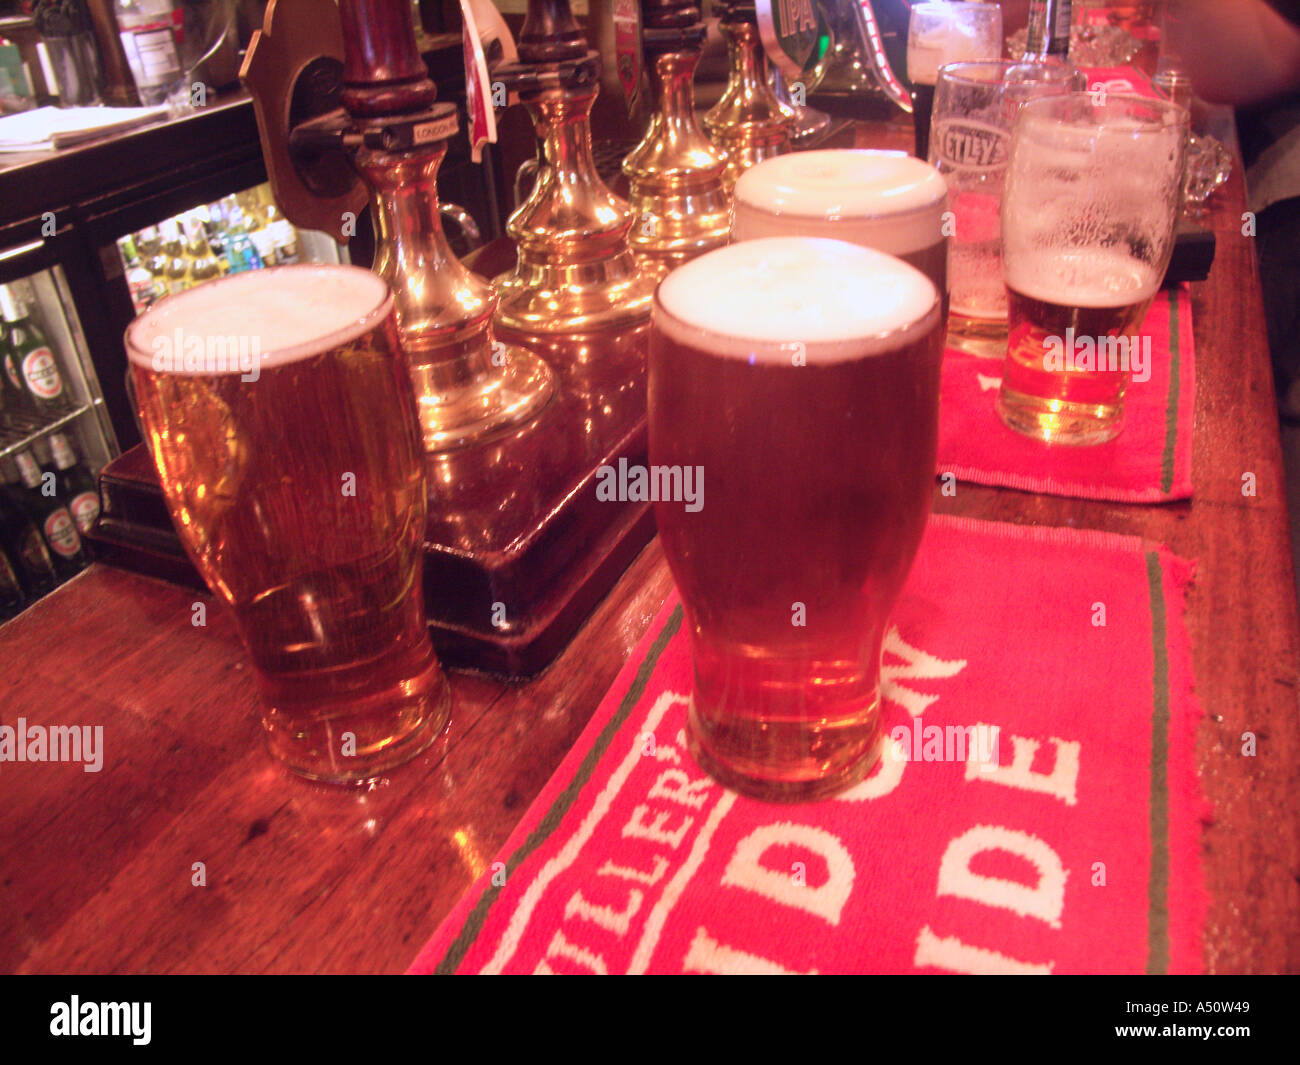 Pints of beer on the bar London pub interior England Stock Photo